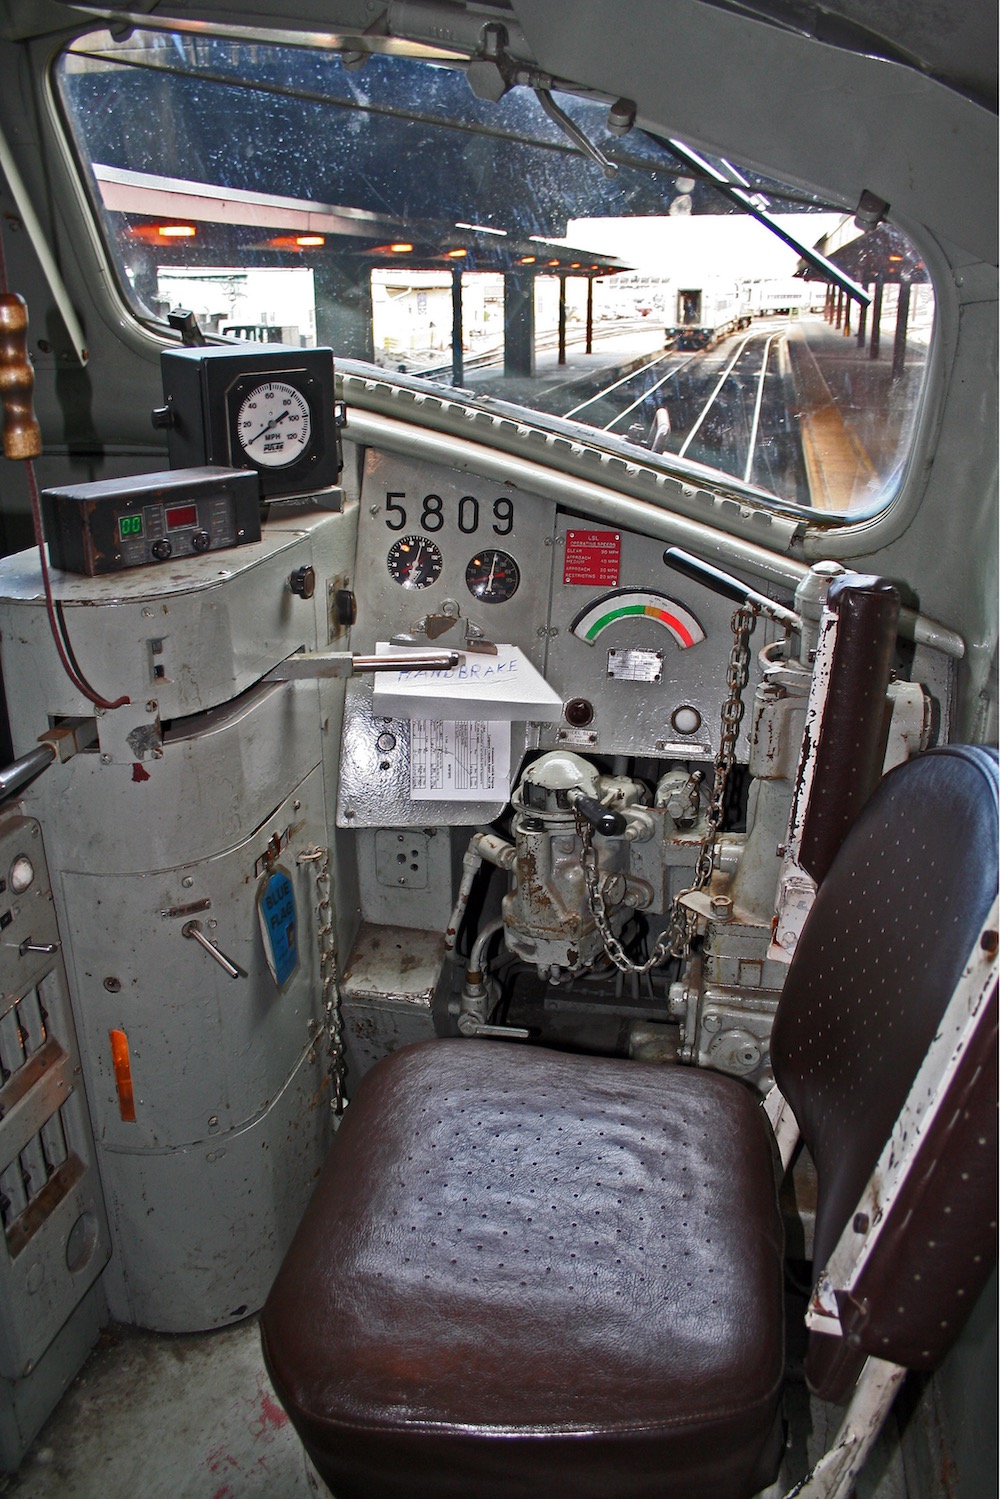 An image showing the interior of a E8 diesel locomotive cab